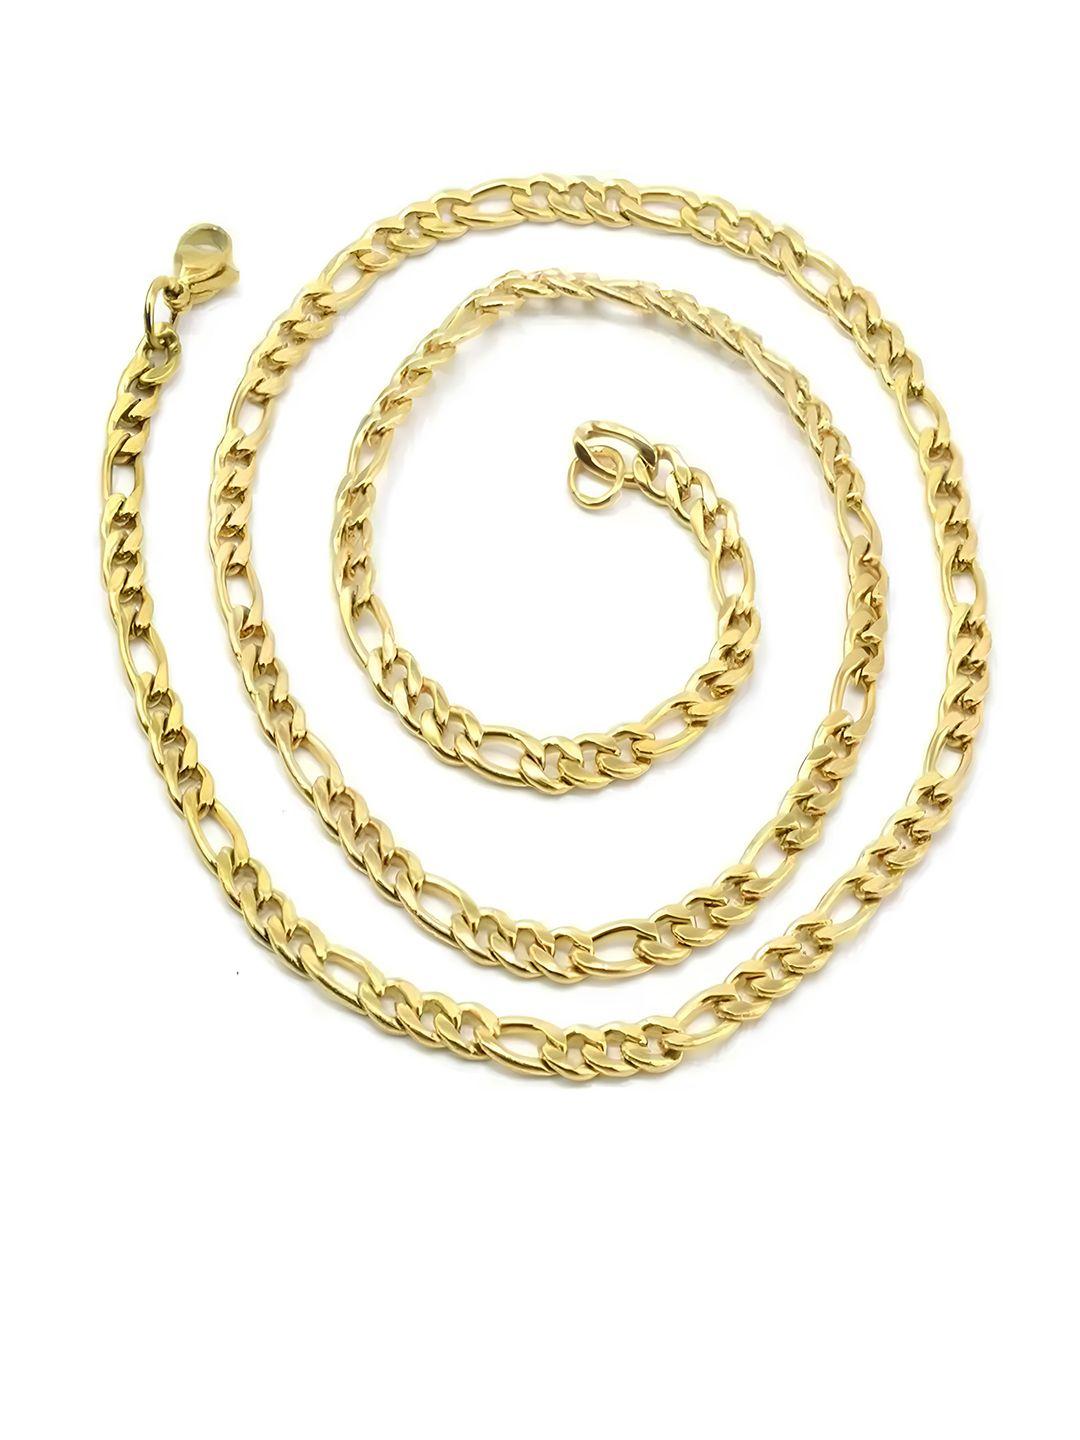 karishma kreations gold-plated stainless steel chain